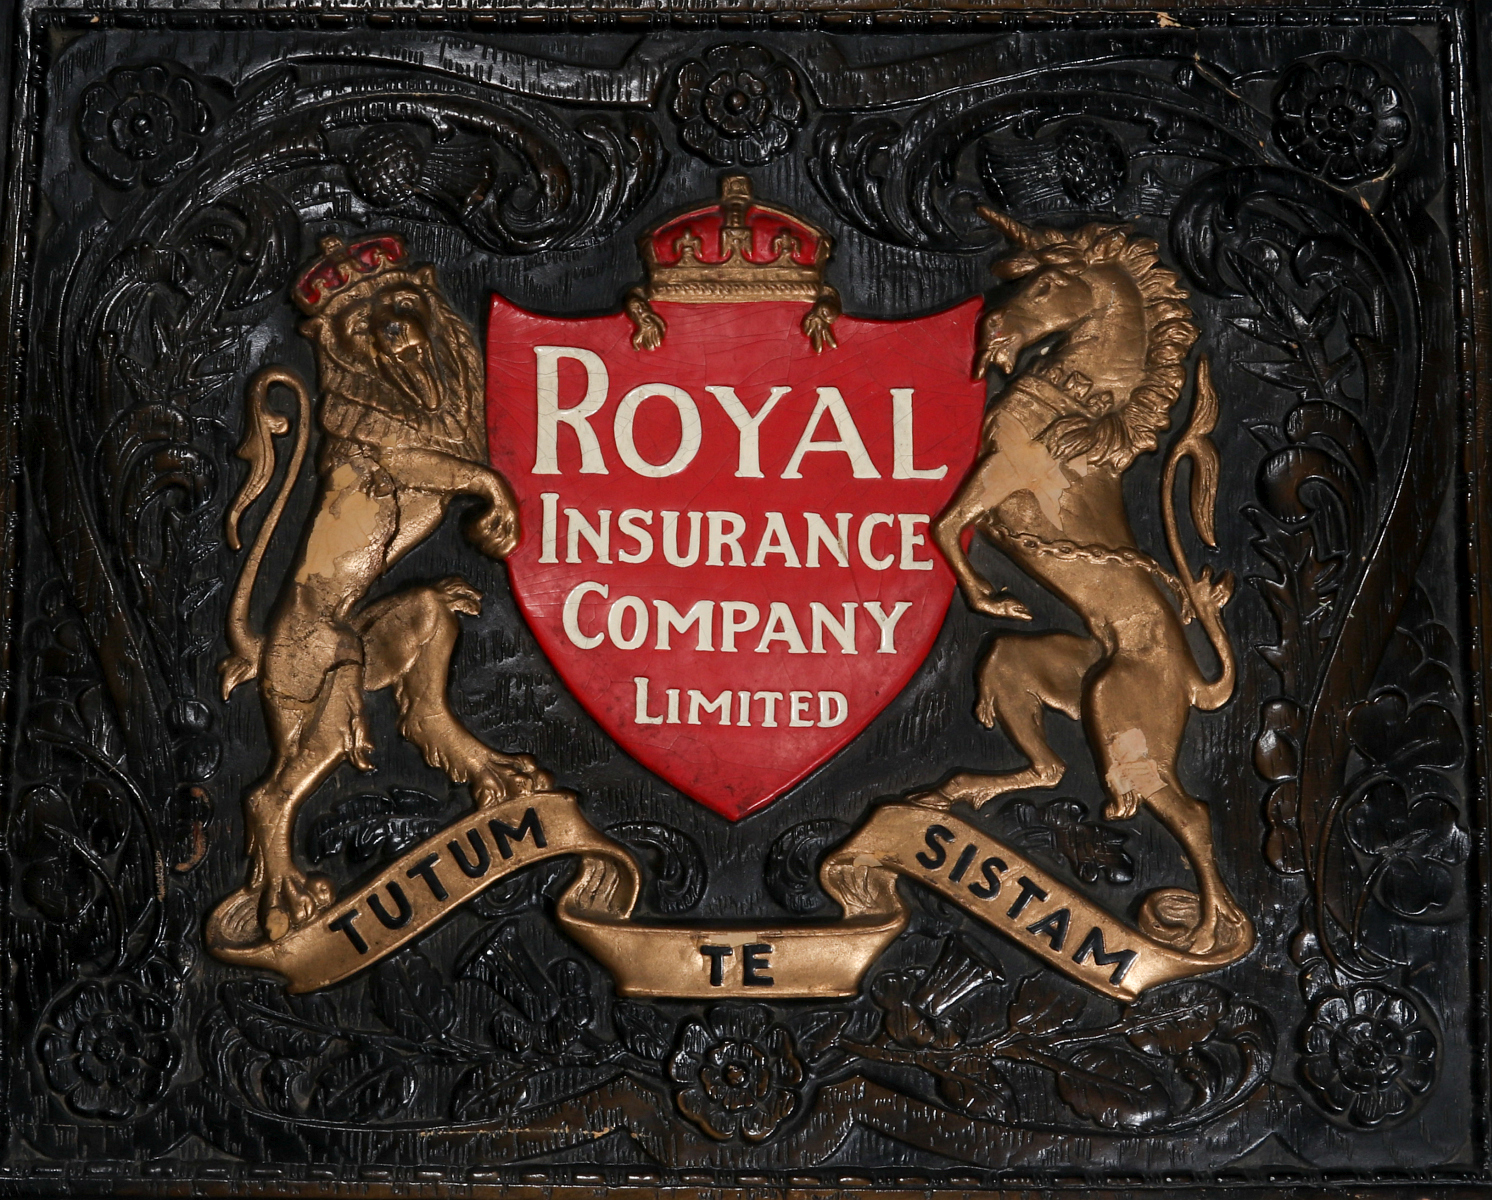 A ROYAL INSURANCE COMPANY ADVERTISING PLAQUE